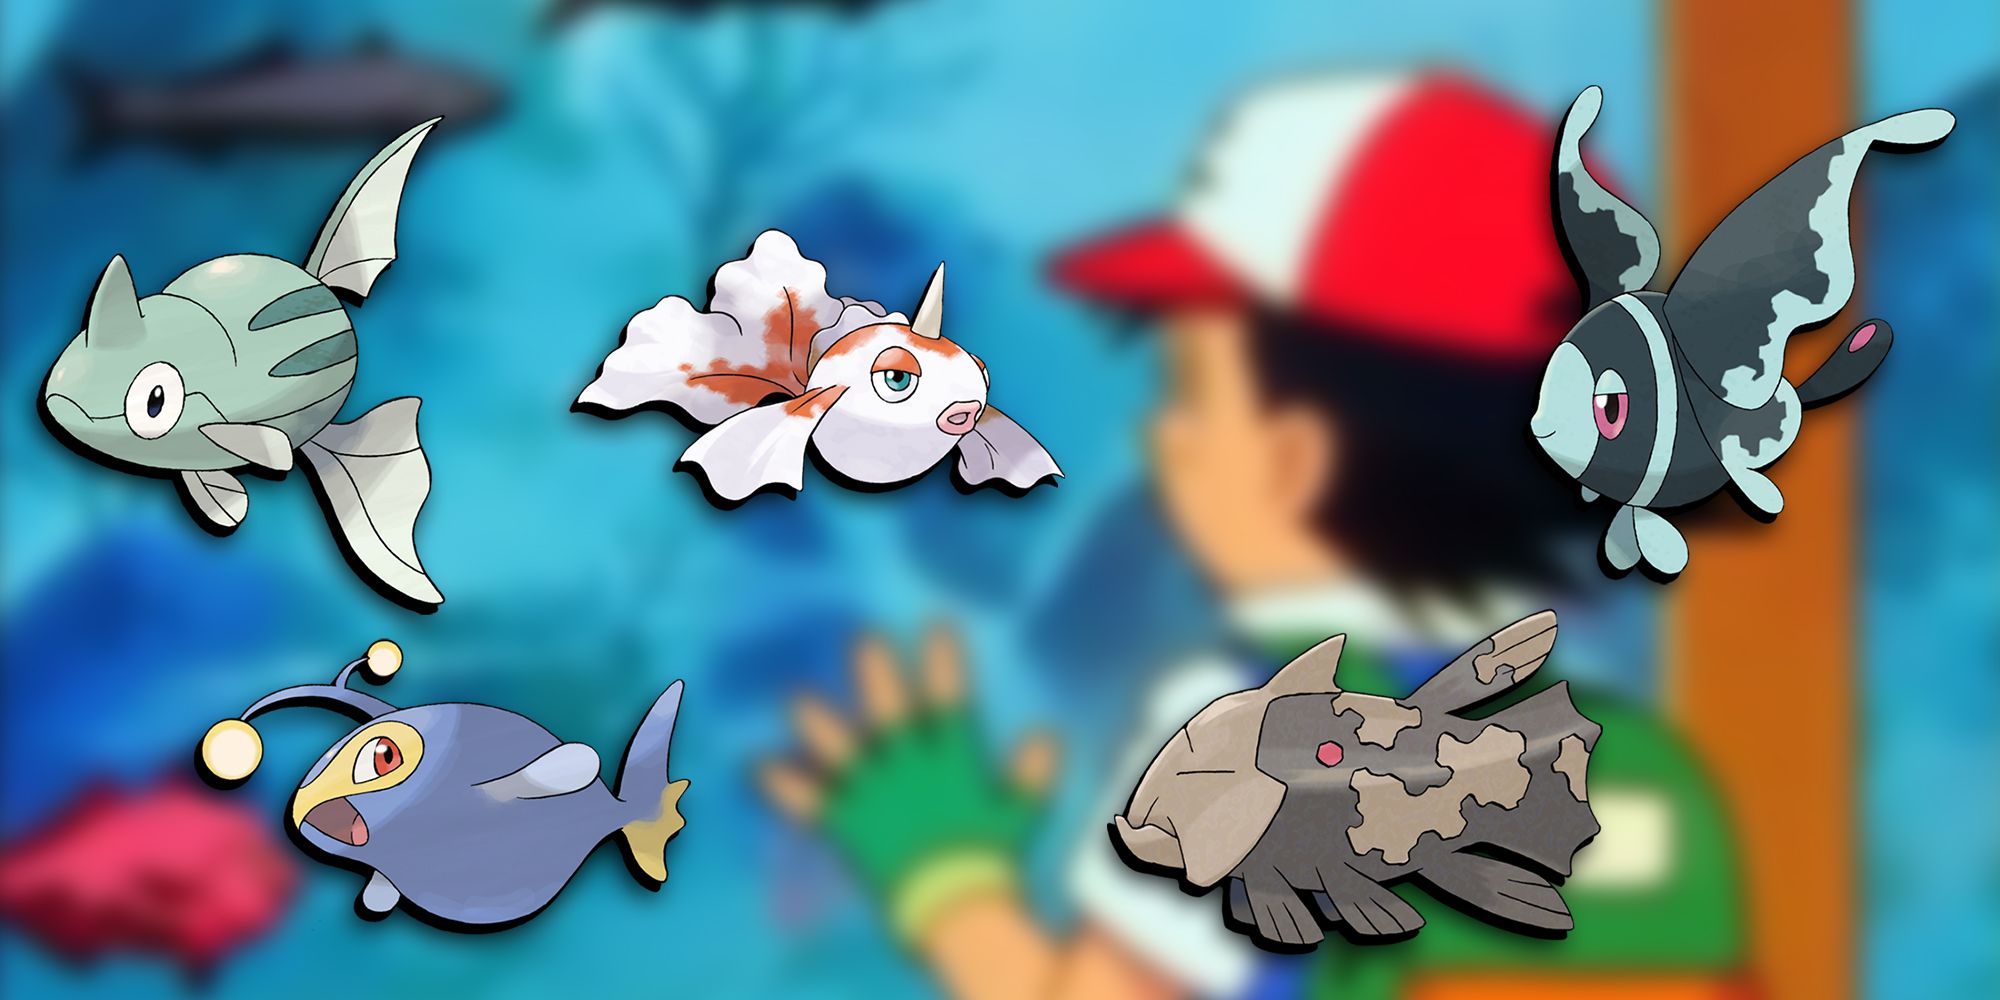 Pokemon - Some Fish Pokemon PNGs Overlaid On Image Of Ash Looking Into A Fish Tank